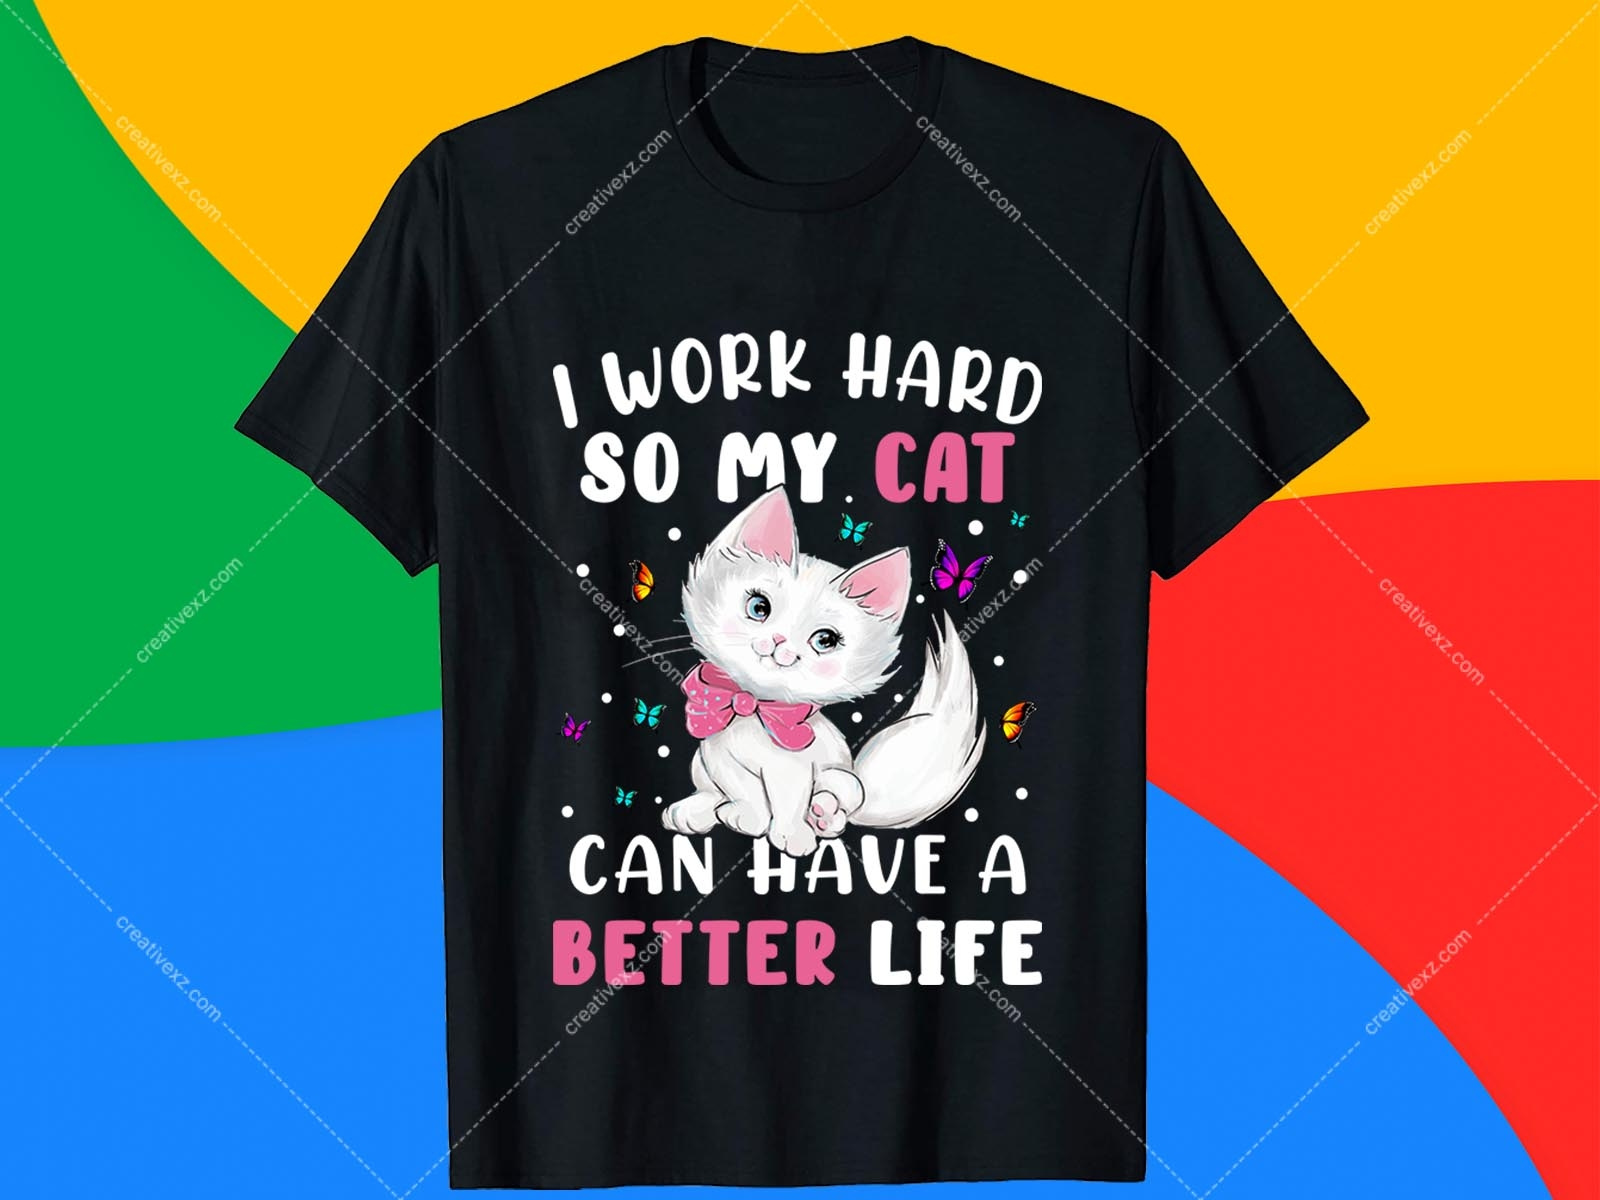 Cat T Shirt Design Free Download By Alex R Xtar On Dribbble